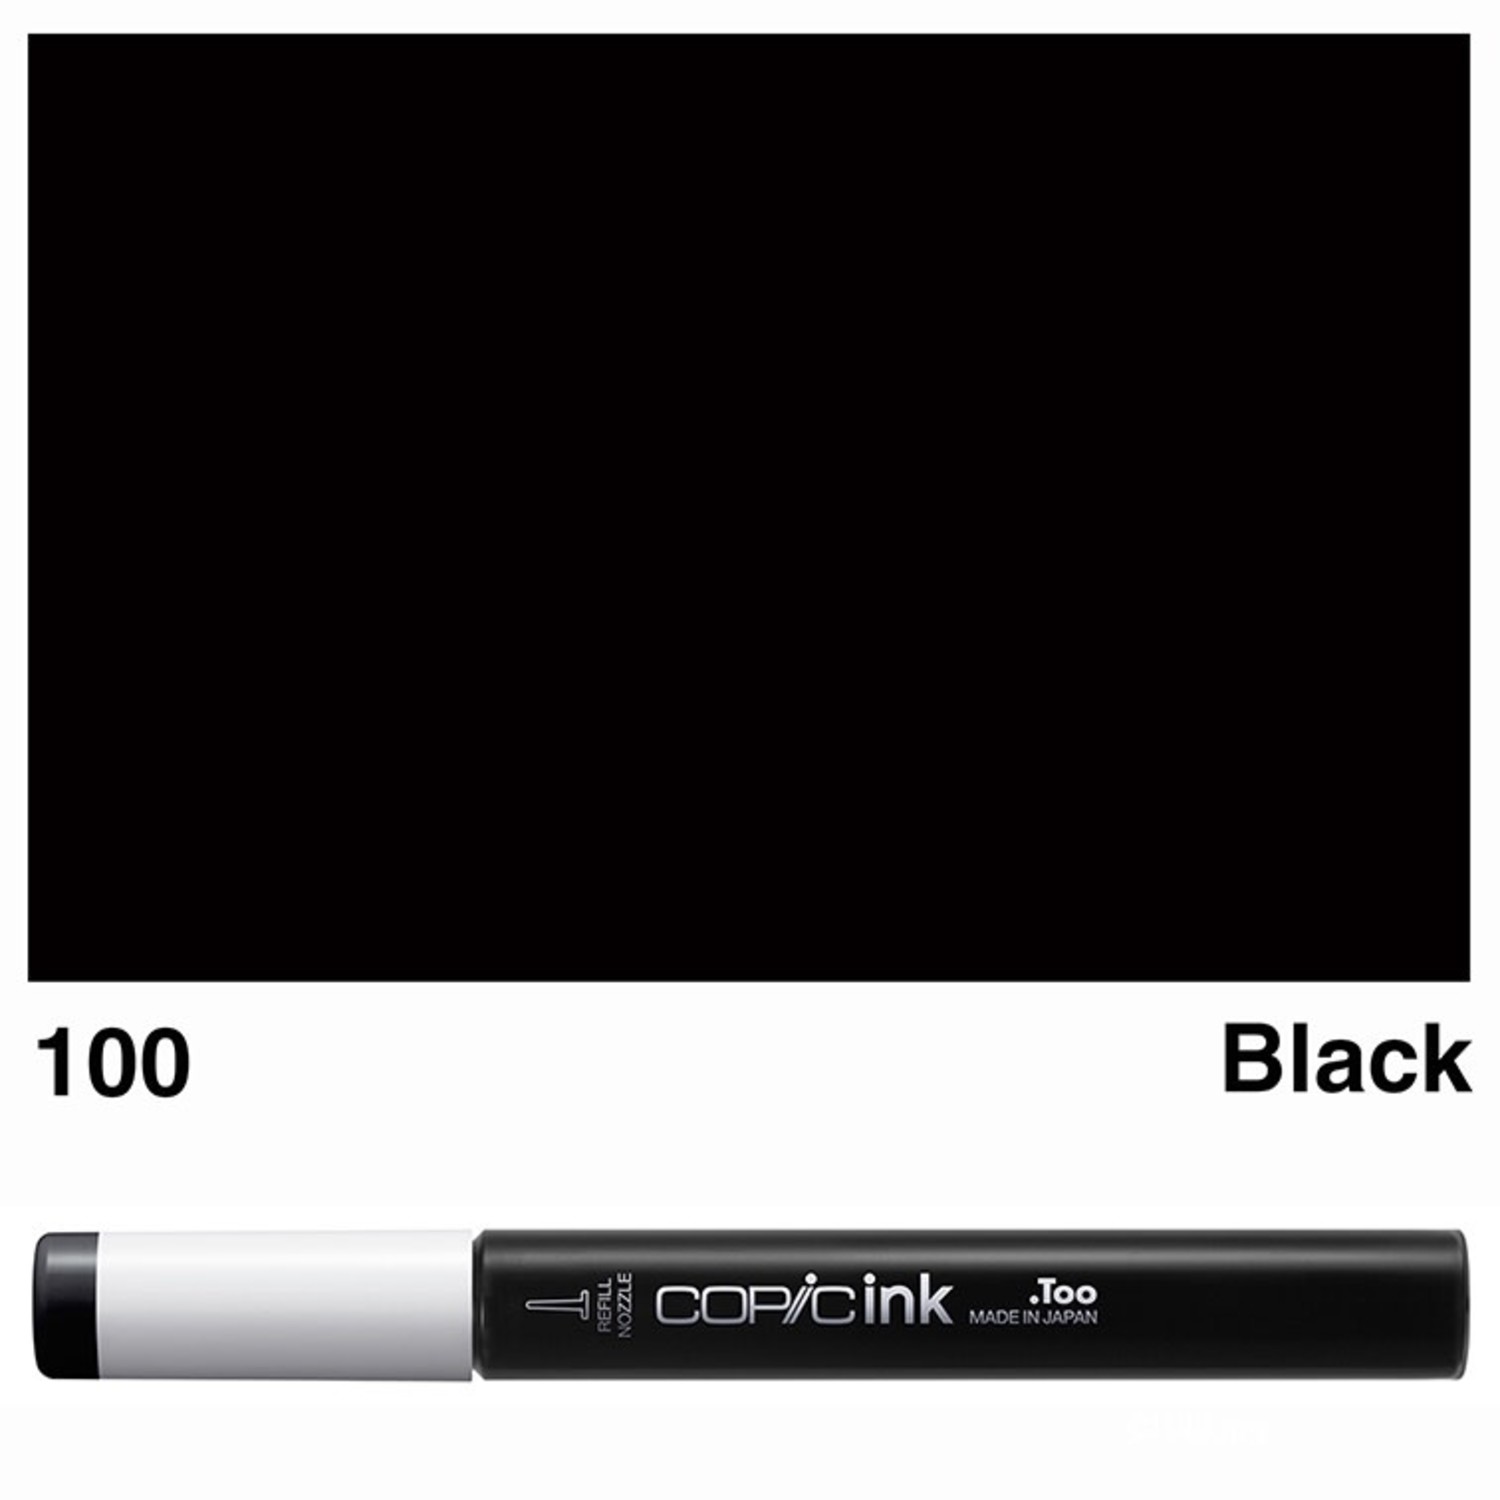 Copic Various Ink Refill - Black - 100